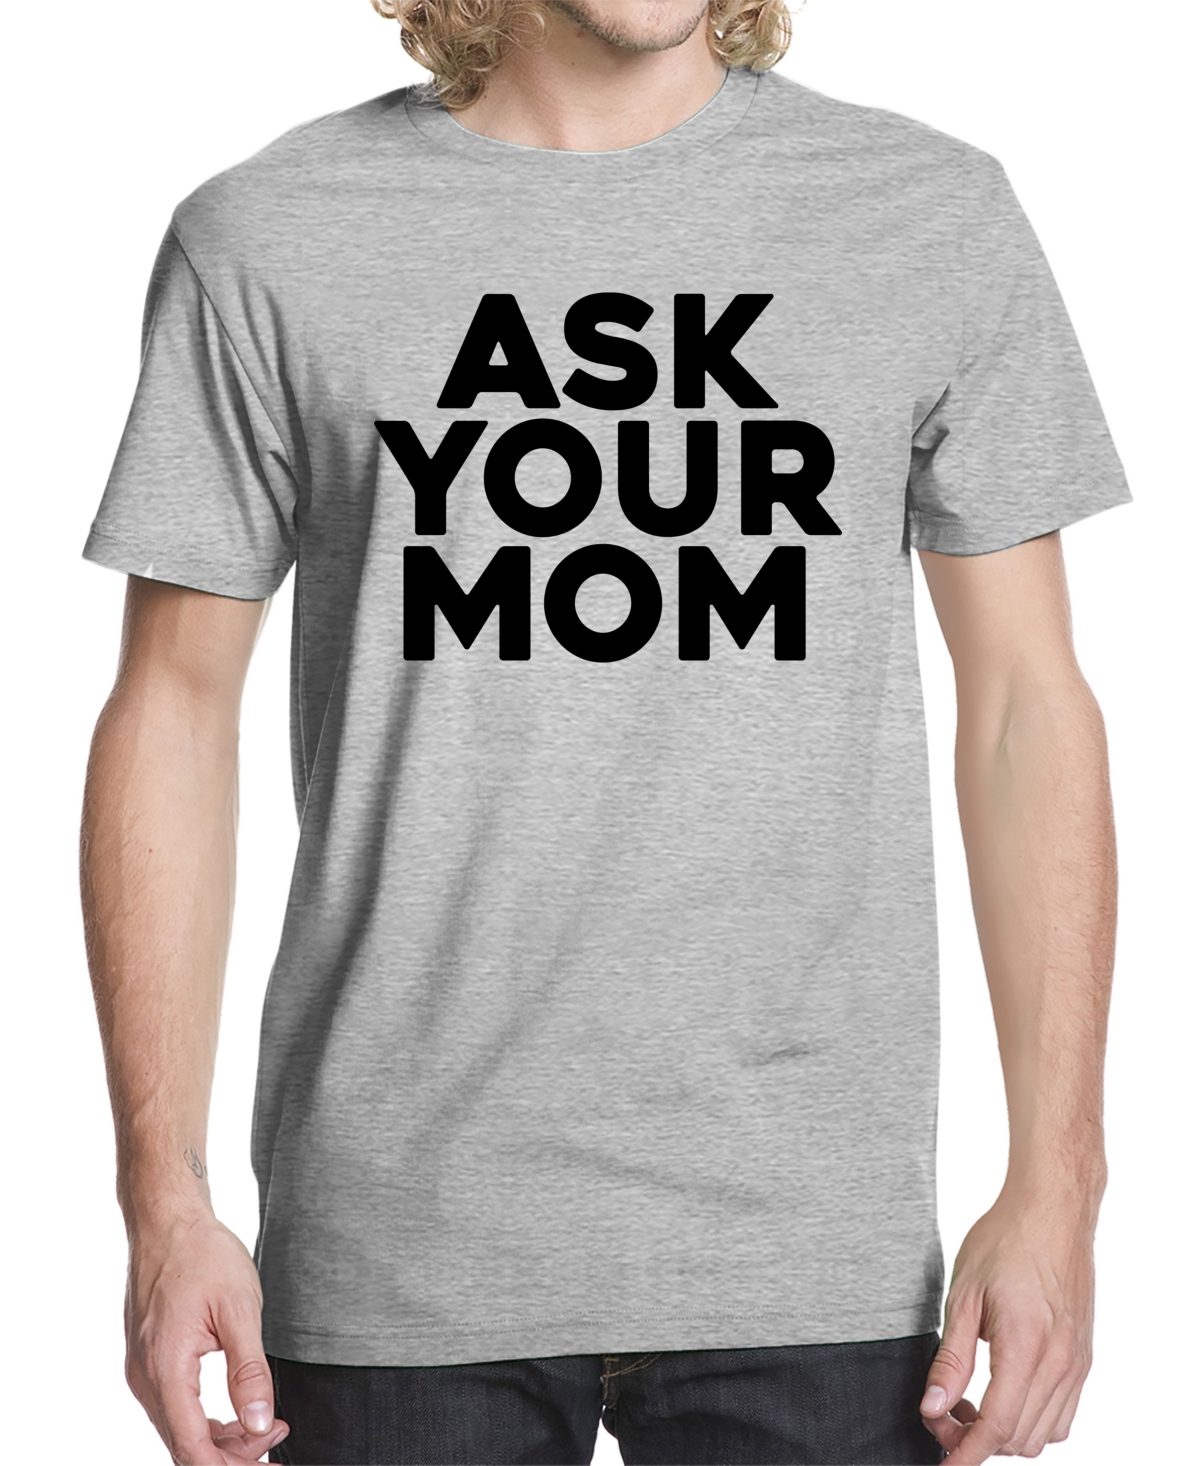 Men's Ask Your Mom Graphic T-shirt - Sport Gray